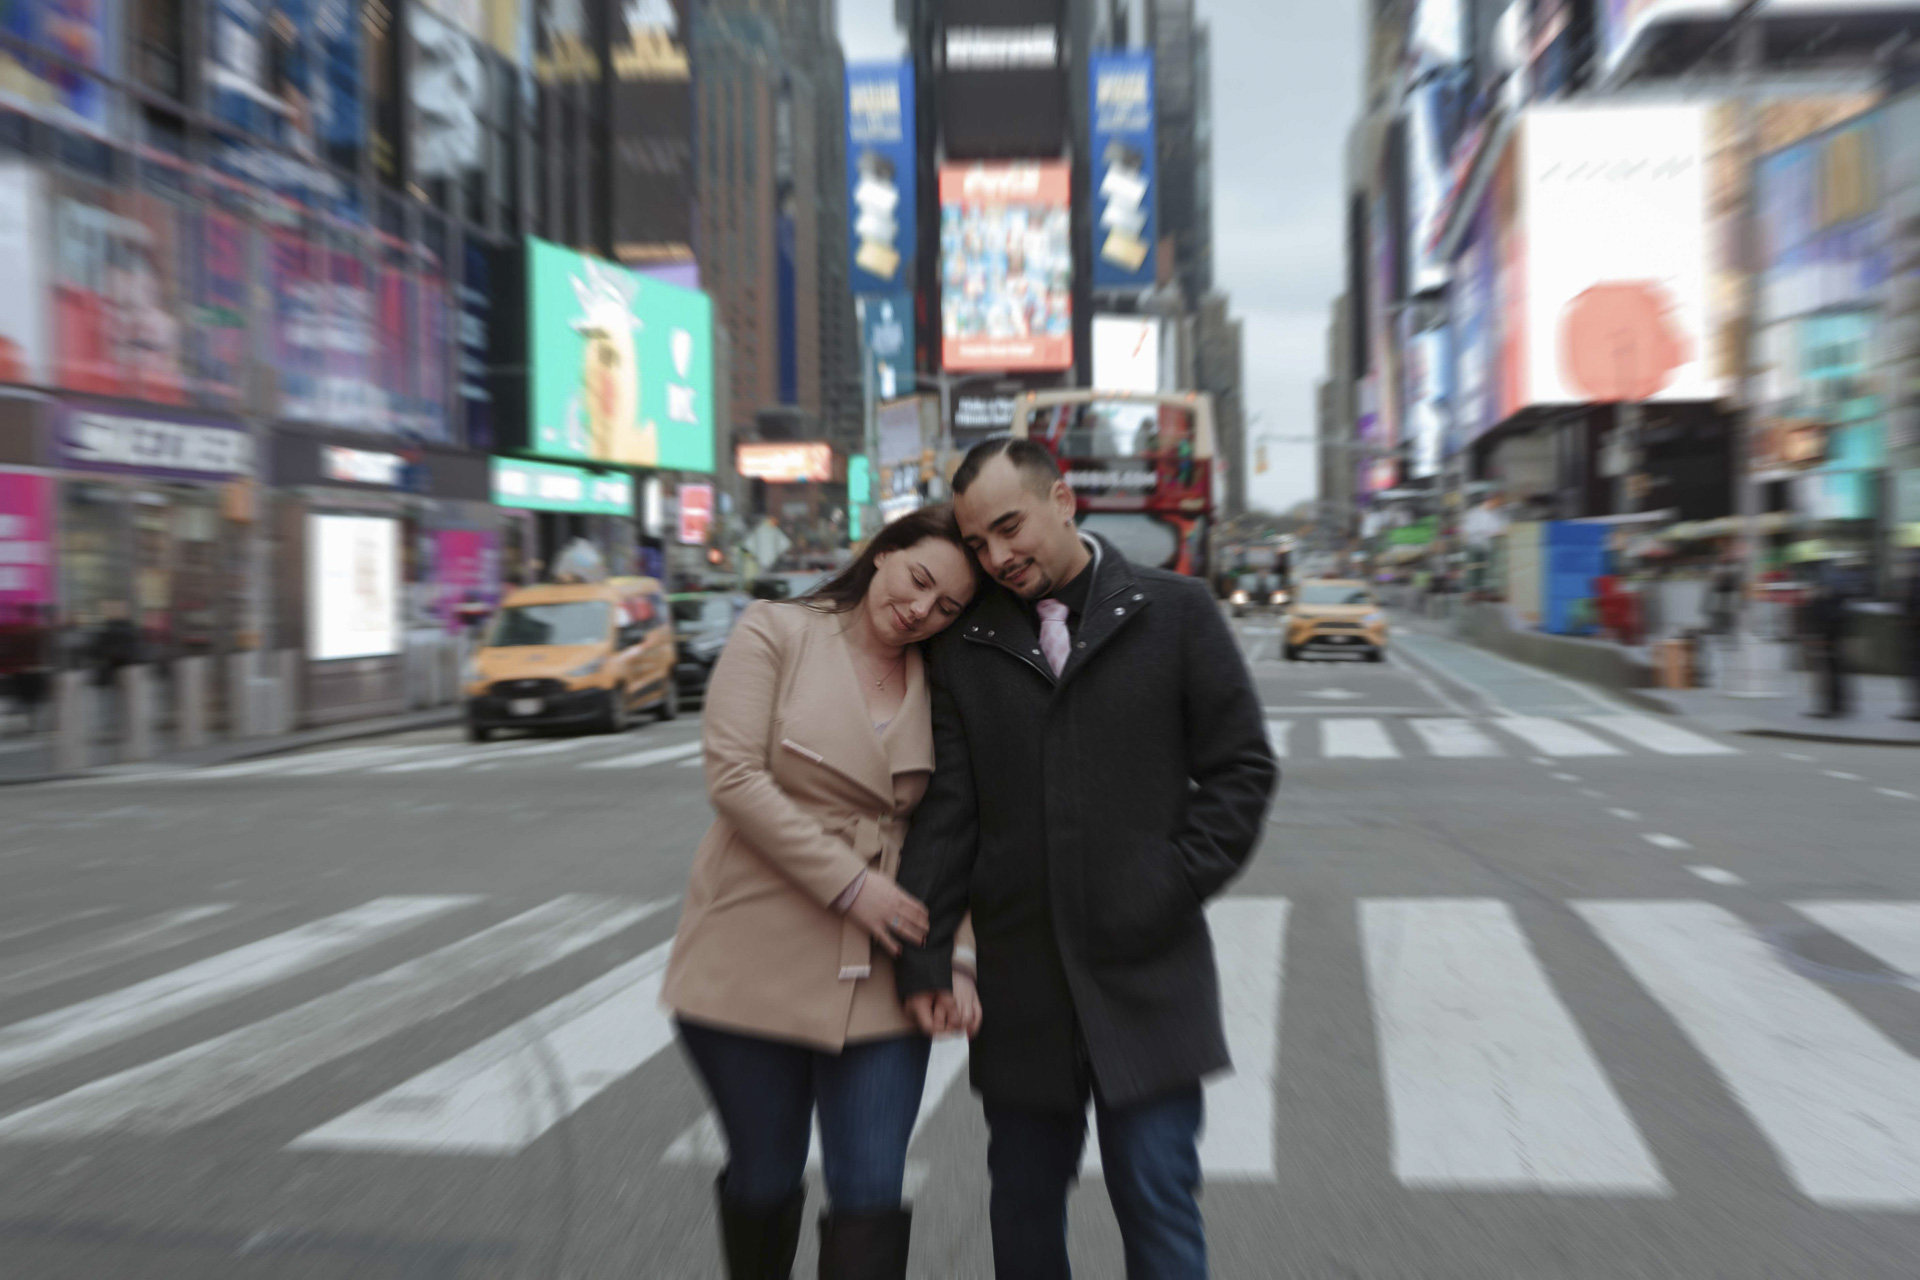 engagement photo session in times square and central park